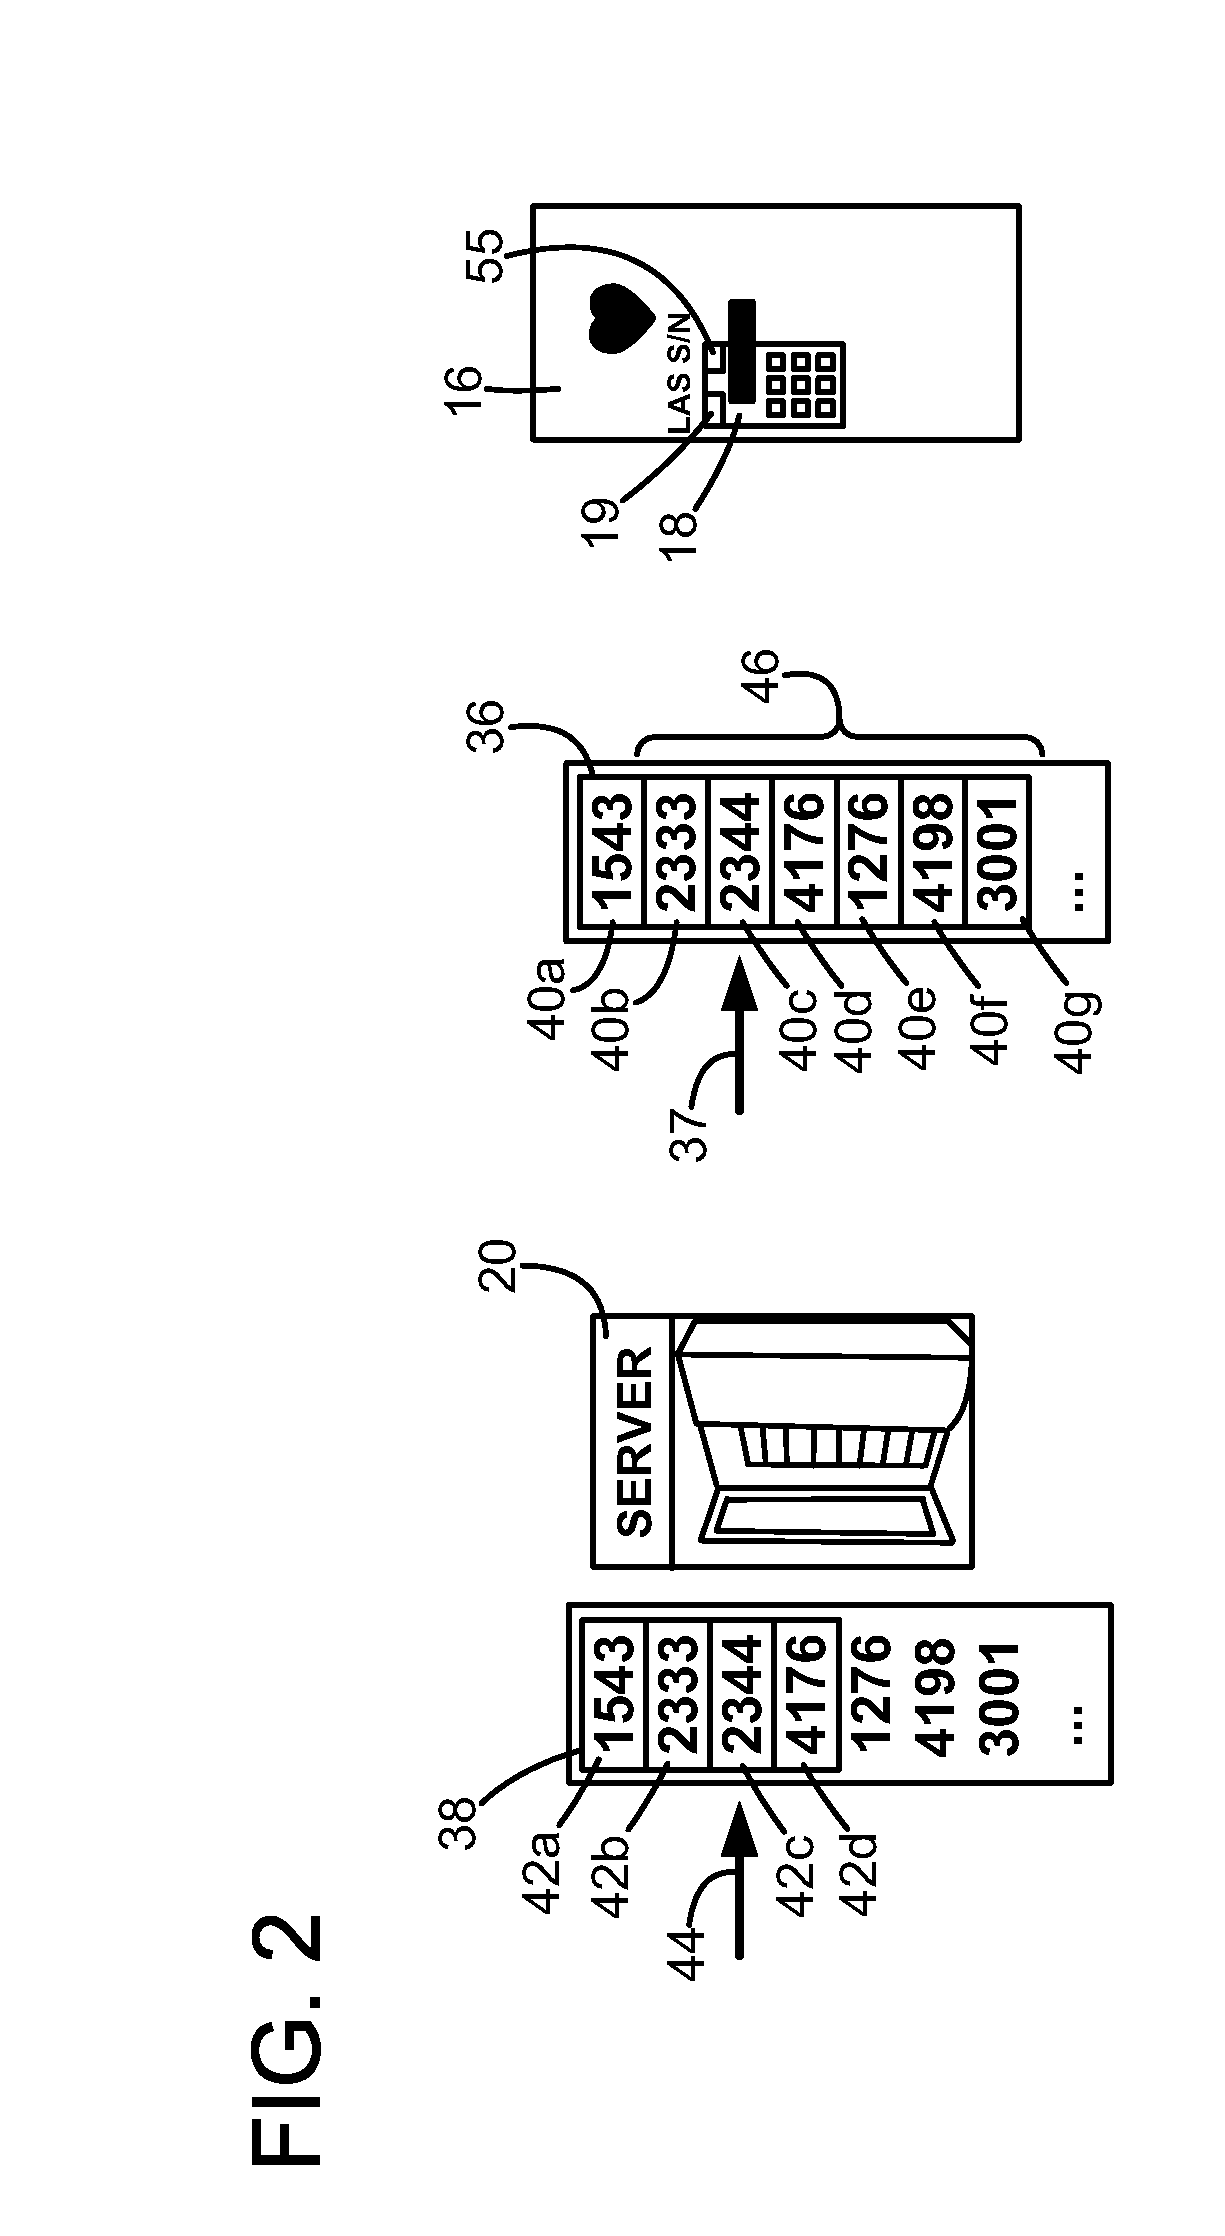 Method of gaining access to a device